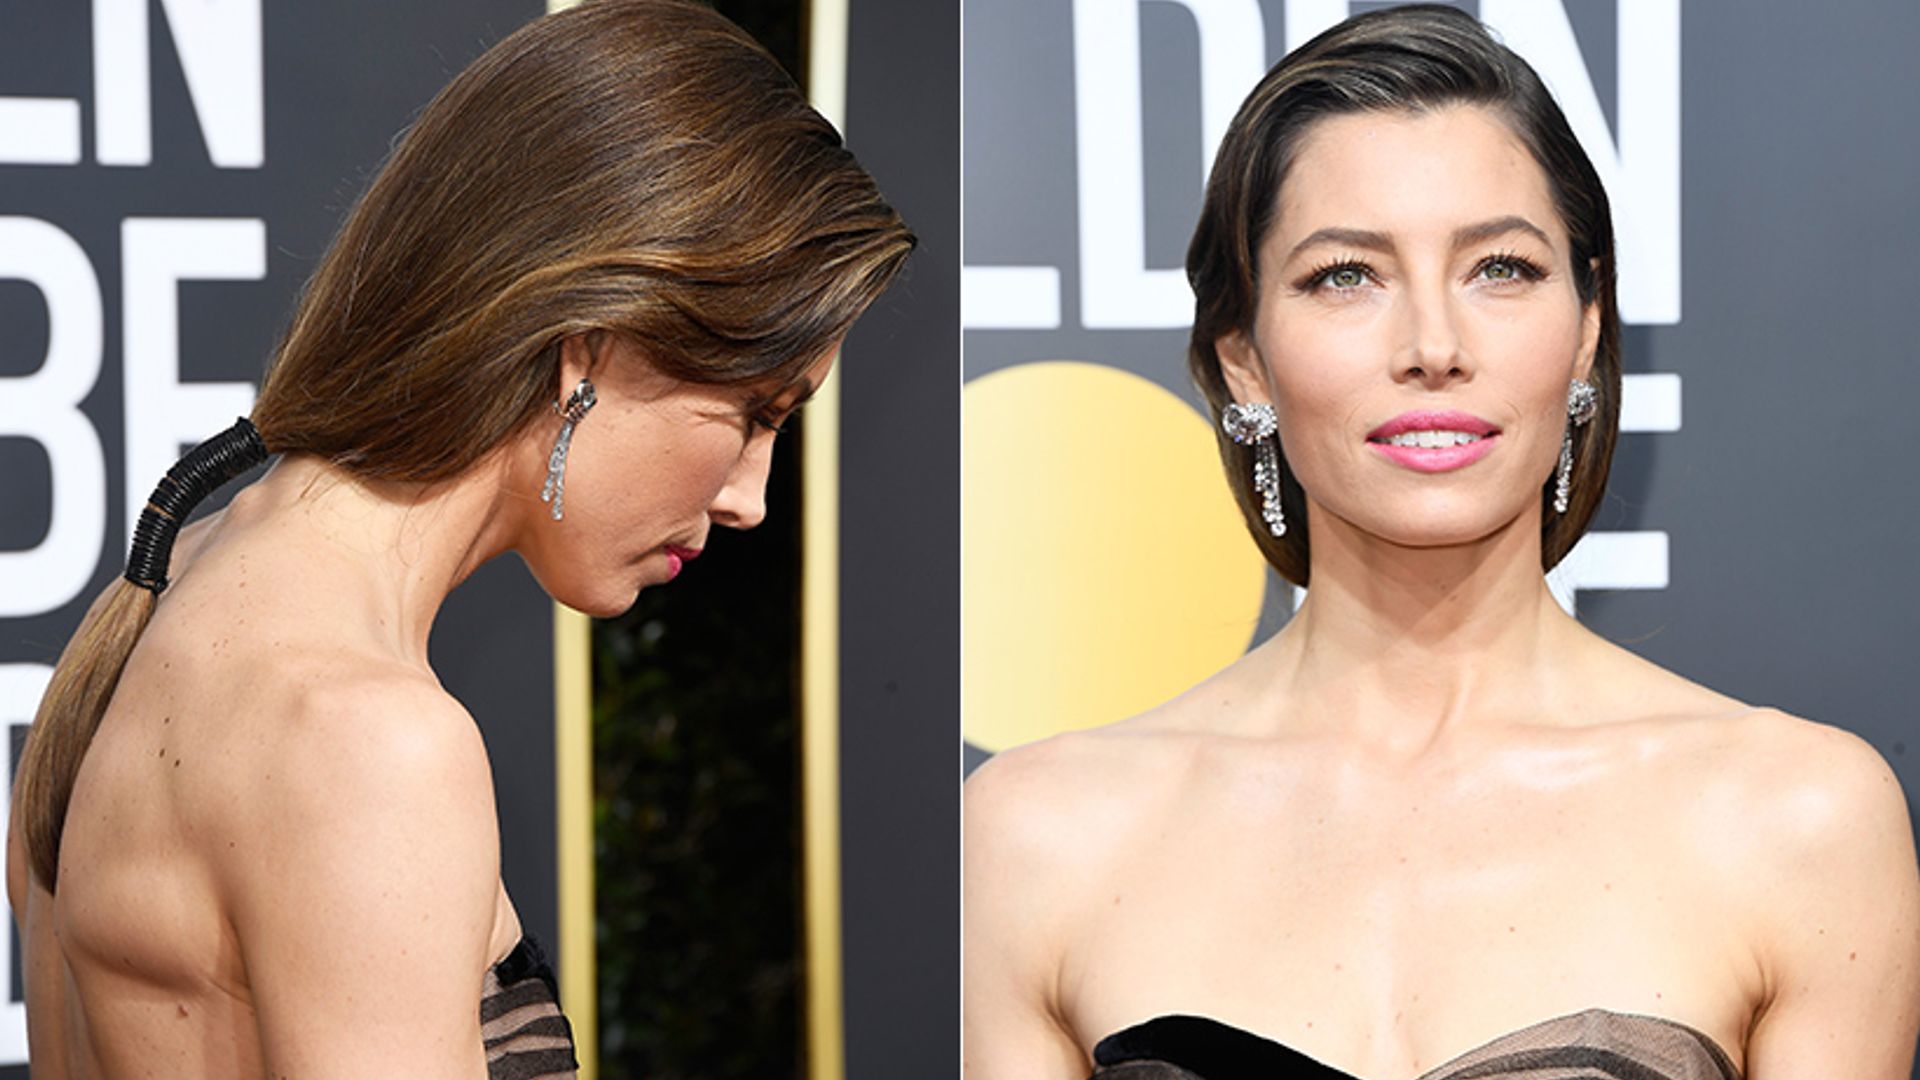 How to recreate Jessica Biel's modern Hollywood hair from the Golden Globes